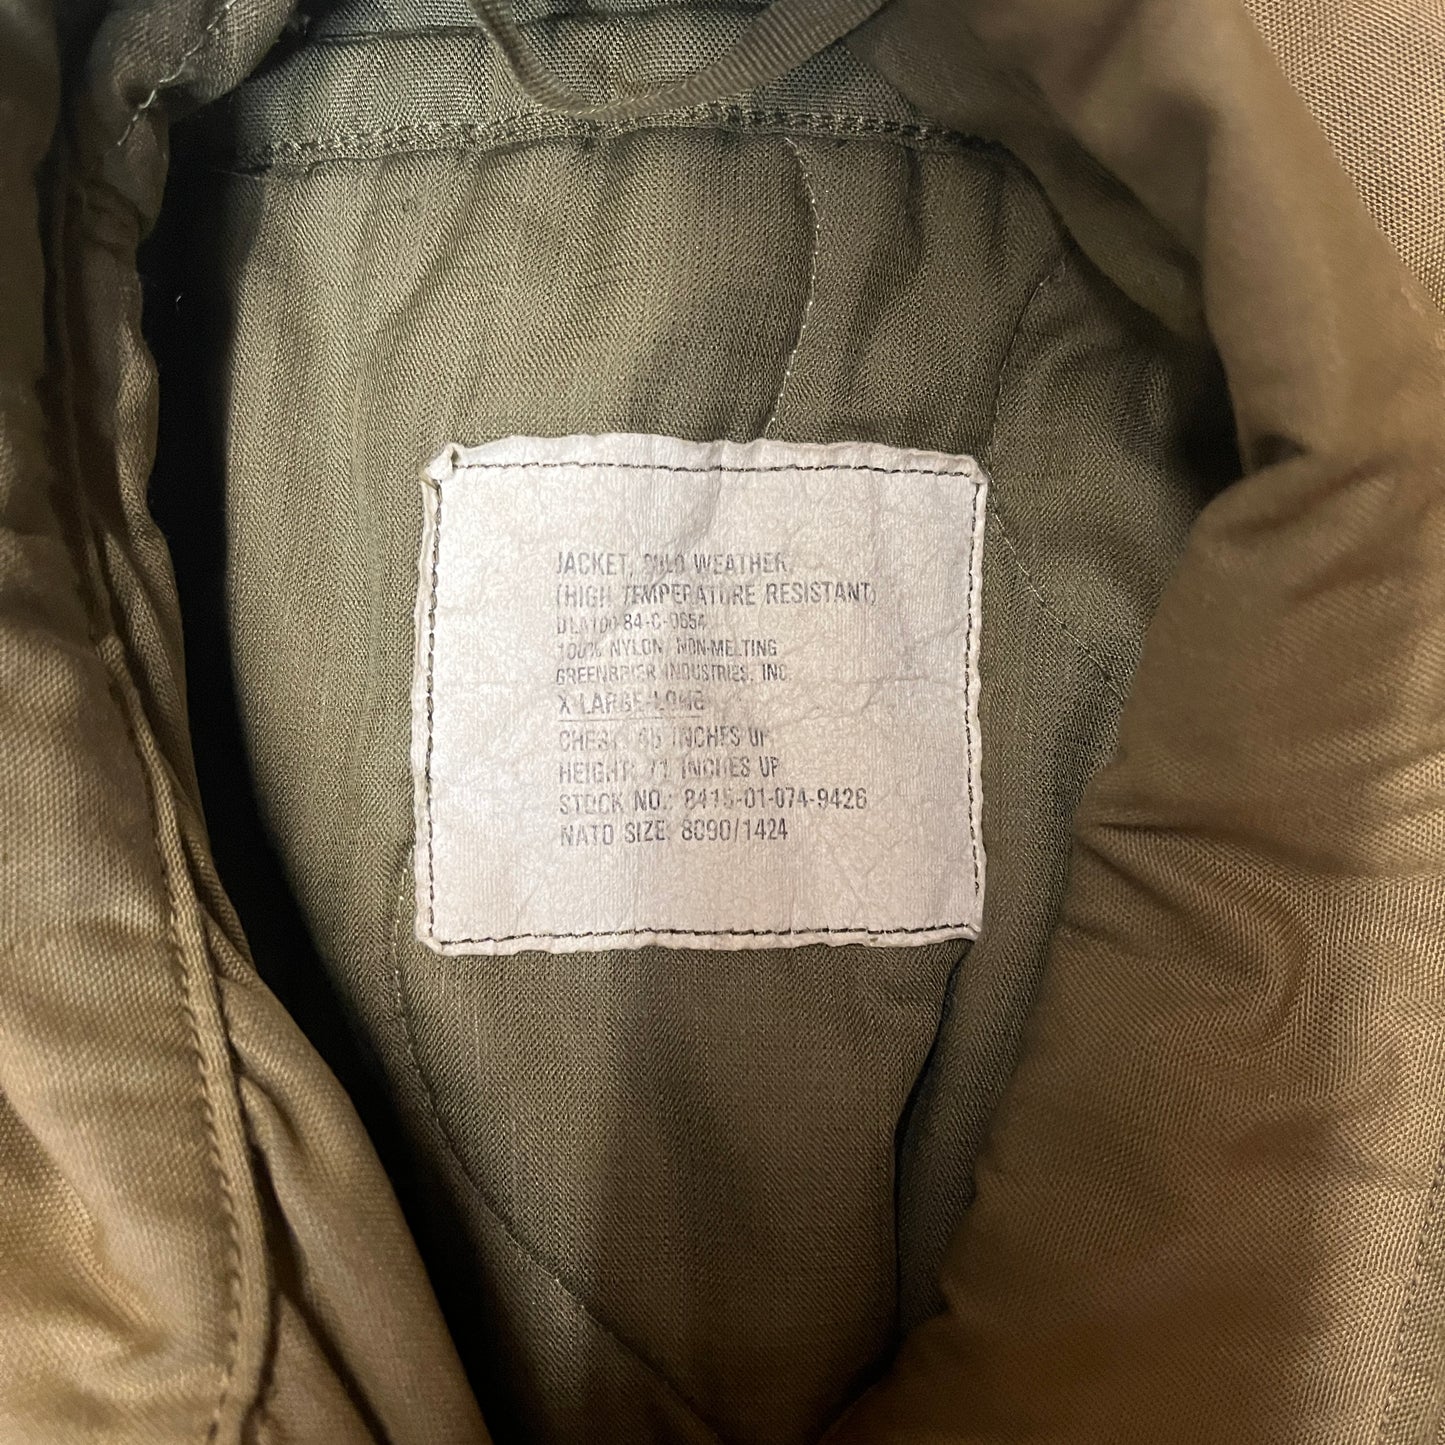 US Army 1970s 1980s Bomber Jacket With Scovill "Gripper" Zipper